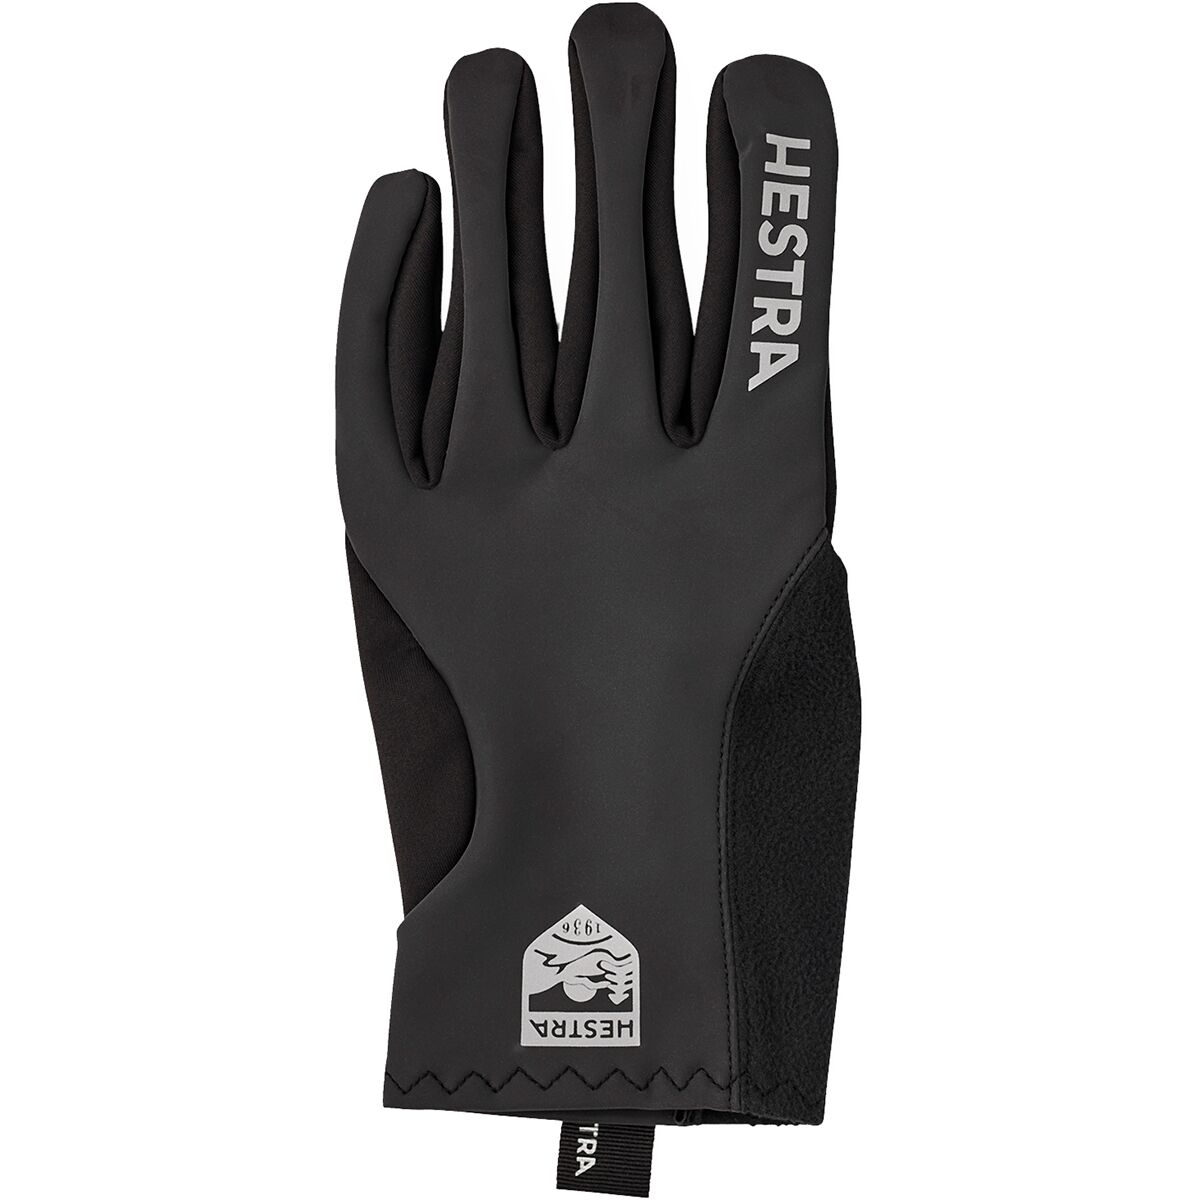 Hestra Runners All Weather Glove